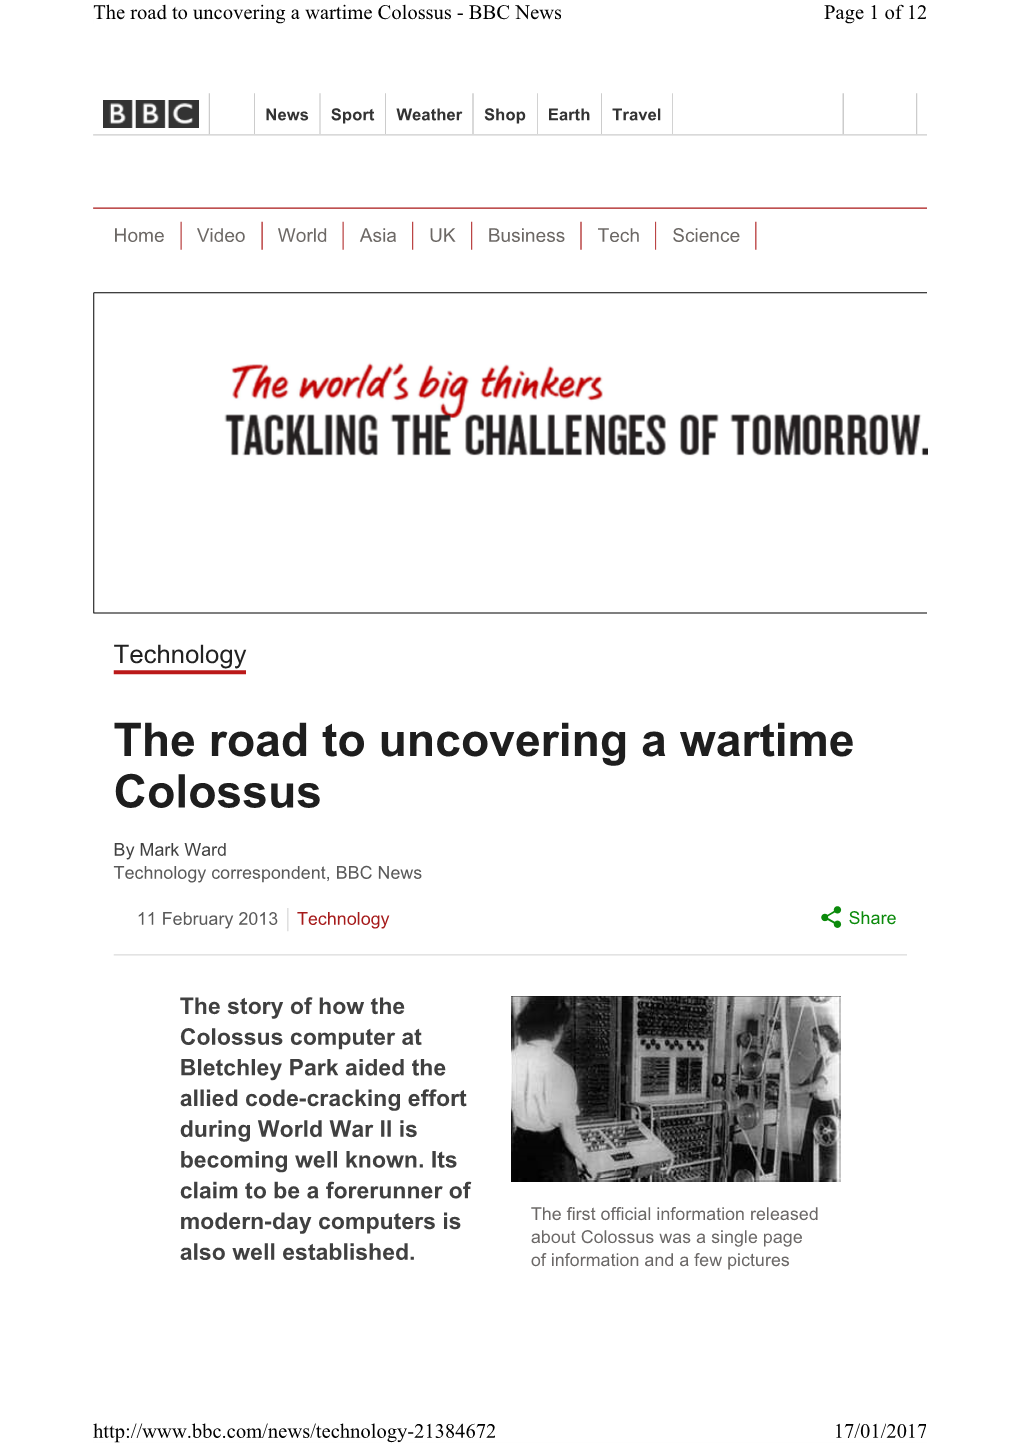 The Road to Uncovering a Wartime Colossus - BBC News Page 1 of 12